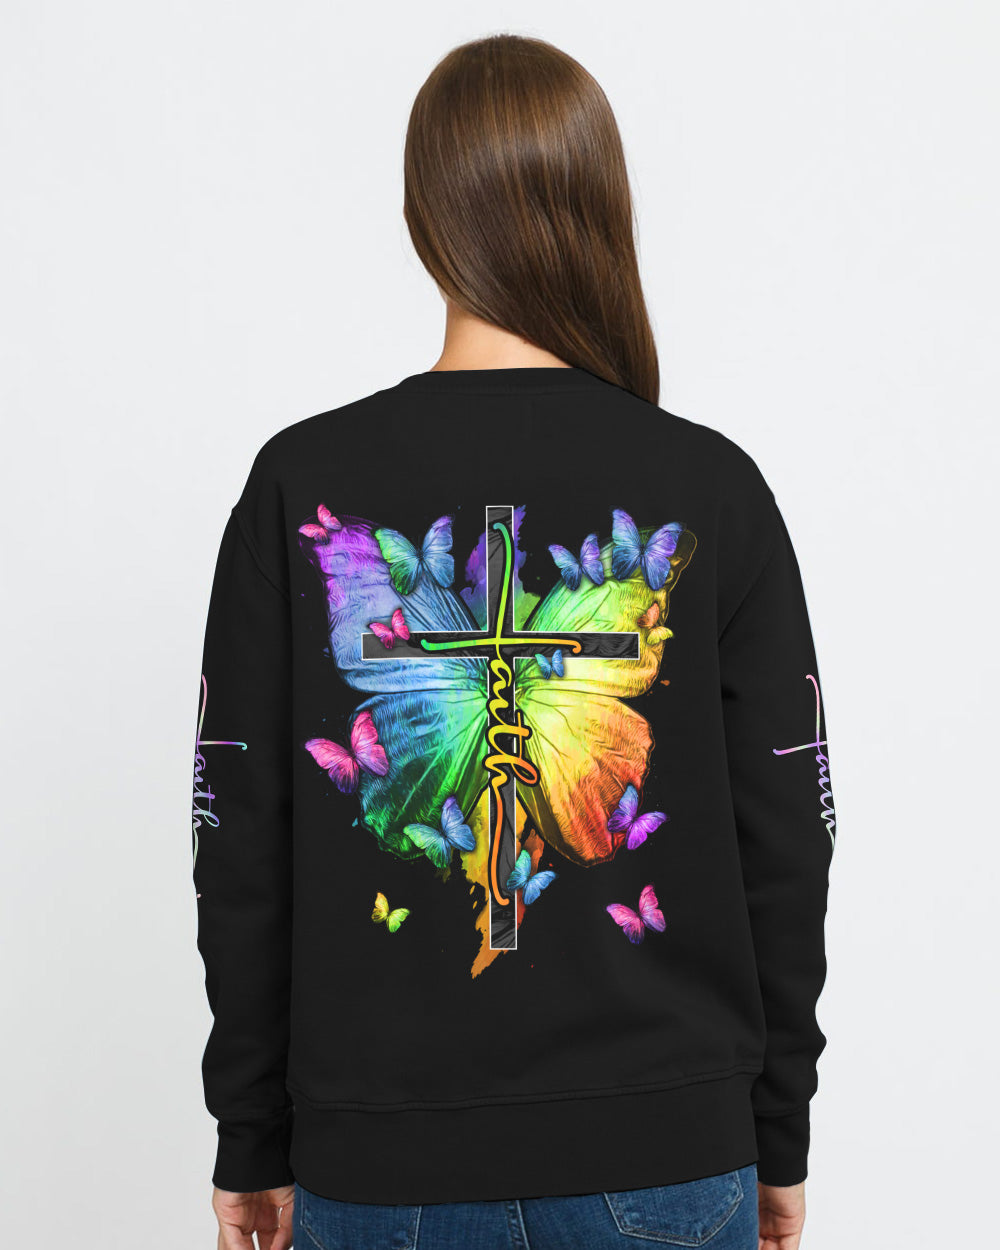 I Can Do All Things Butterfly Women's Christian Sweatshirt